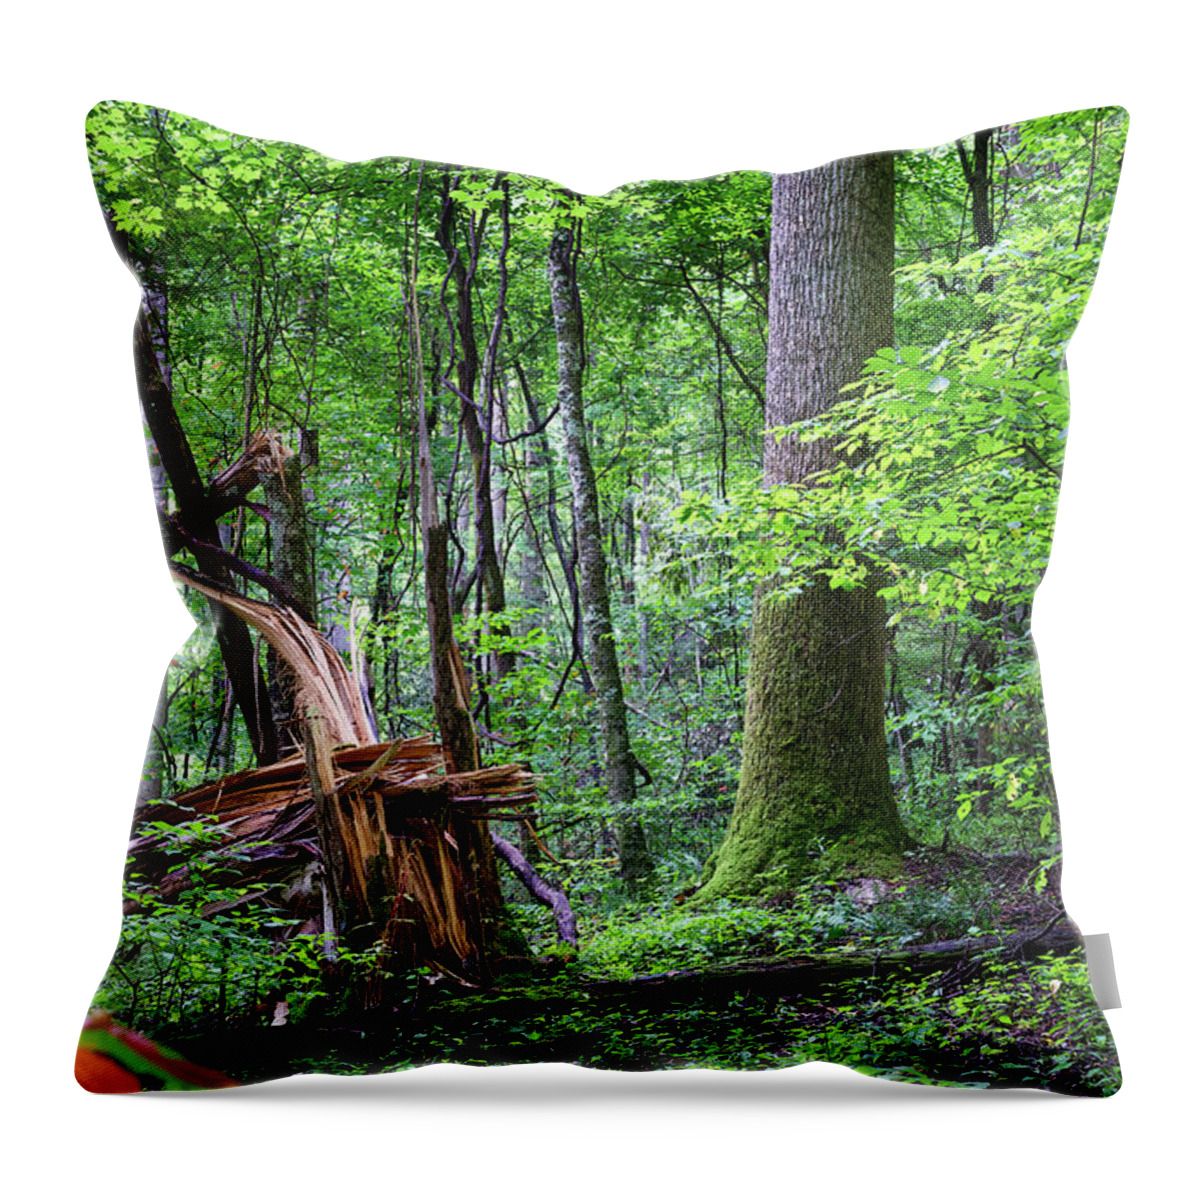 Tree Throw Pillow featuring the digital art Fallen Tree by Phil Perkins